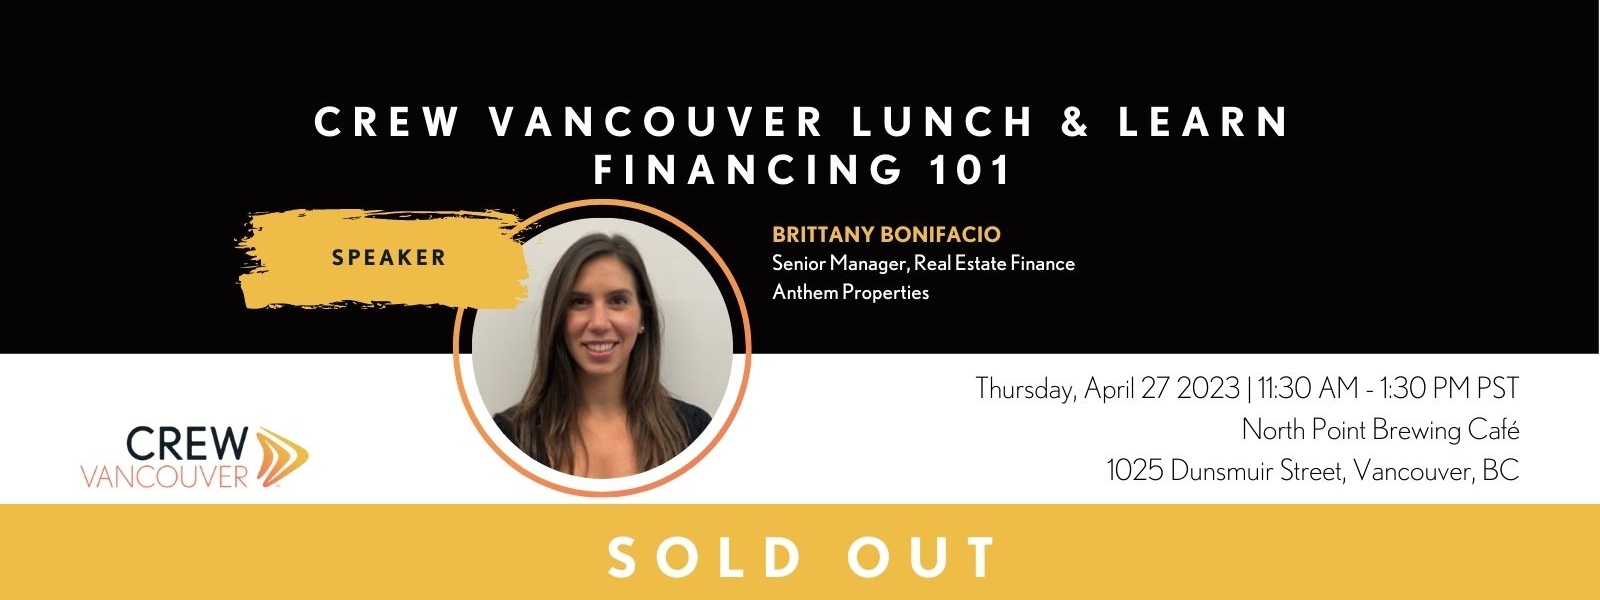 CREW Vancouver Event Lunch and Learn Financing 101 Sold Out 2023 04 27 W